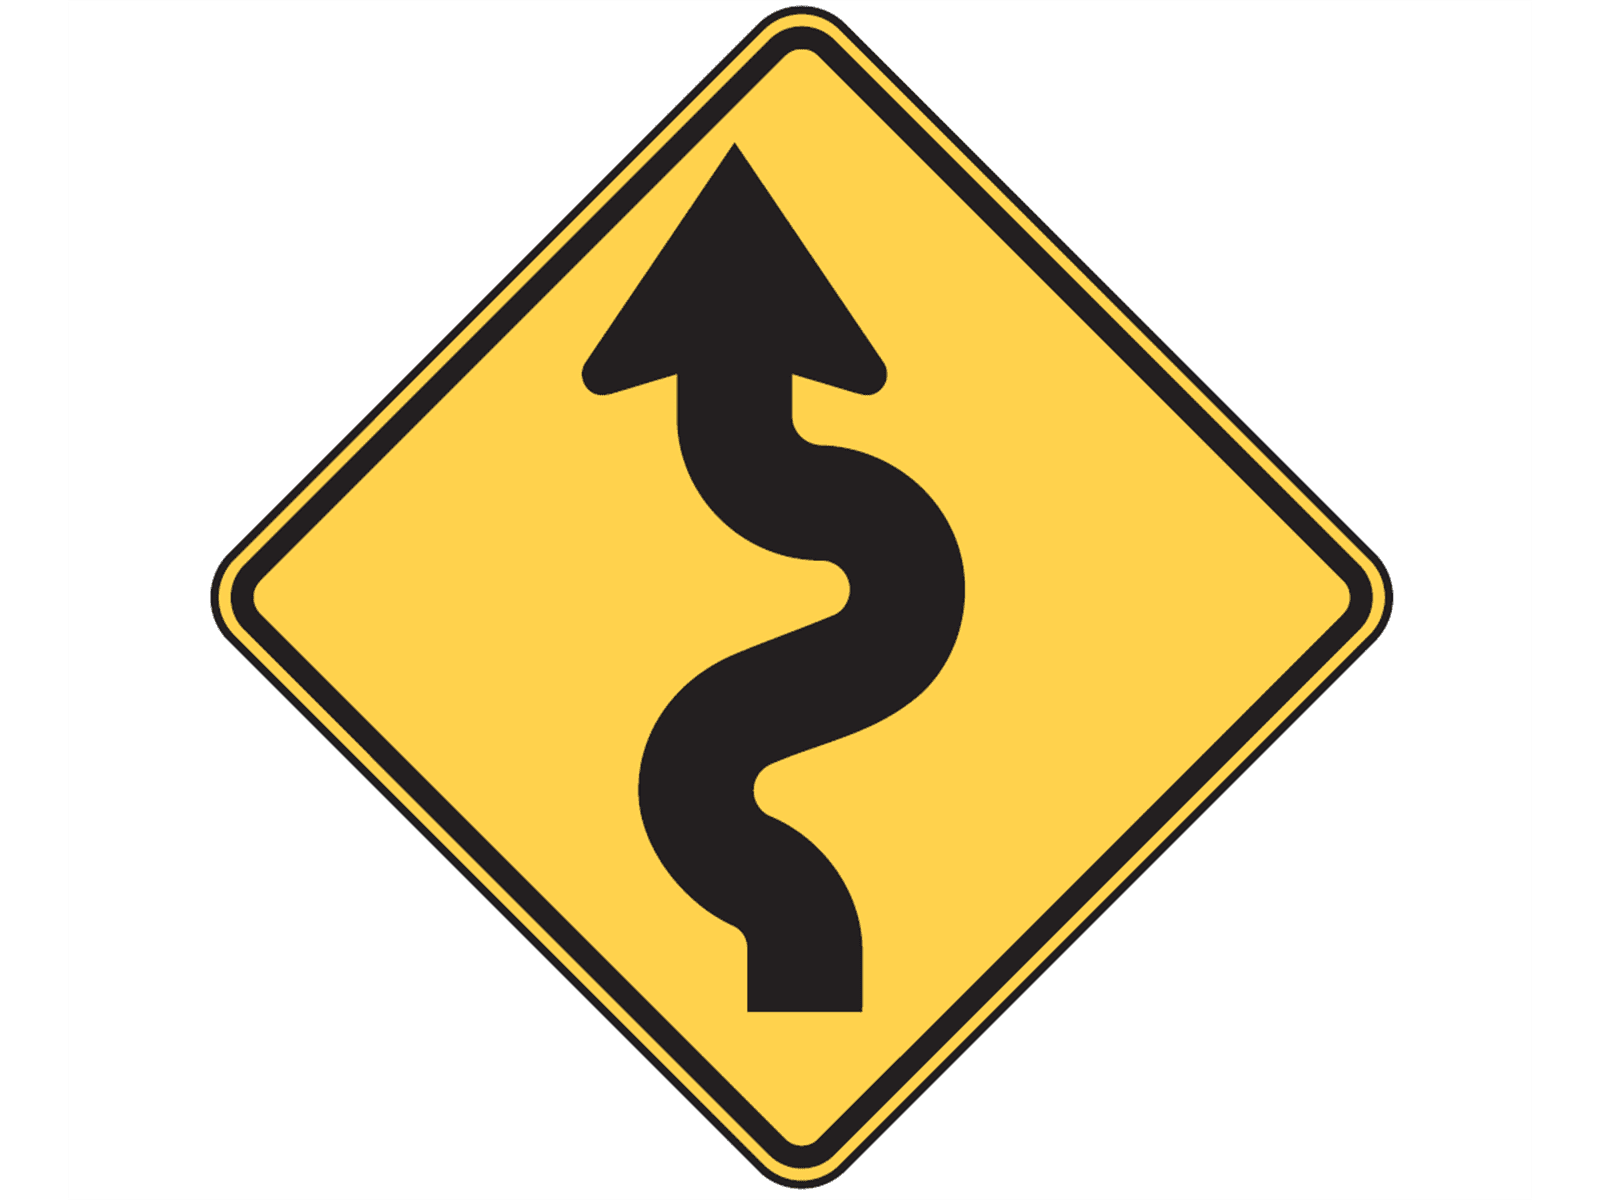 Winding Road Ahead W1-5r - W1: Curves and Turns